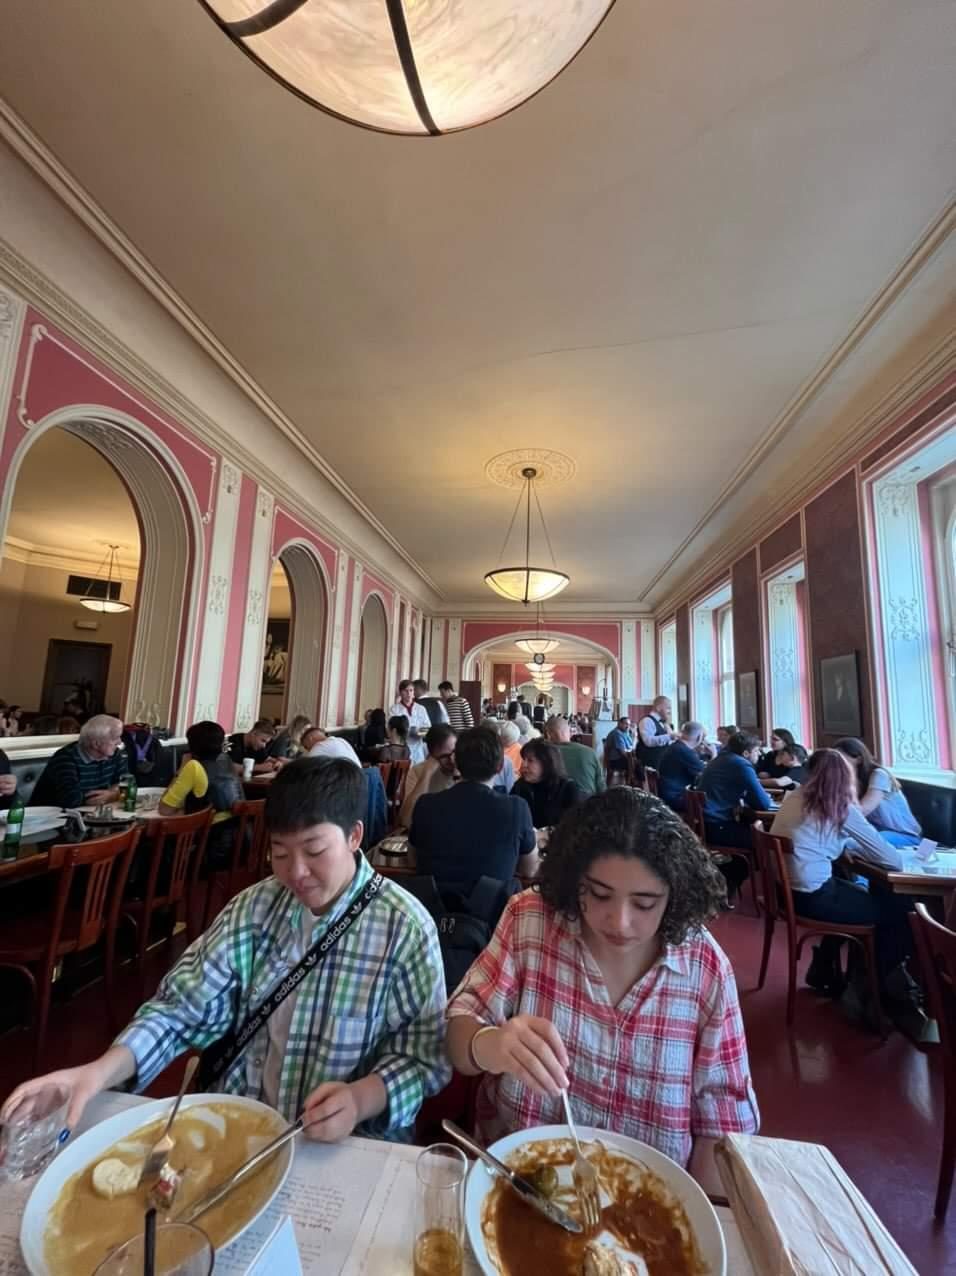 Students eating at a large restaurant.